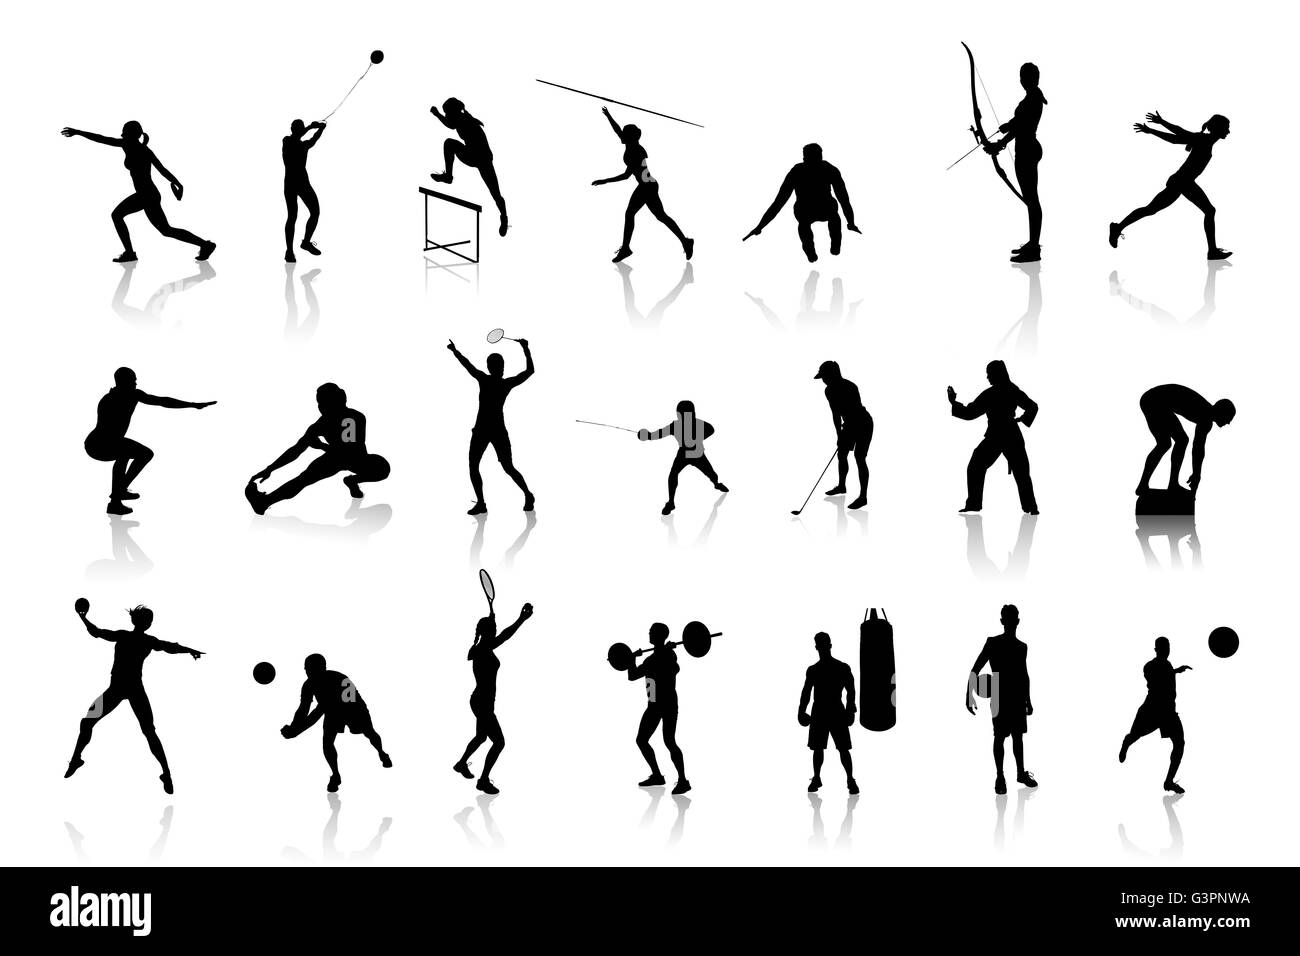 Icons of differents silhouettes Stock Photo